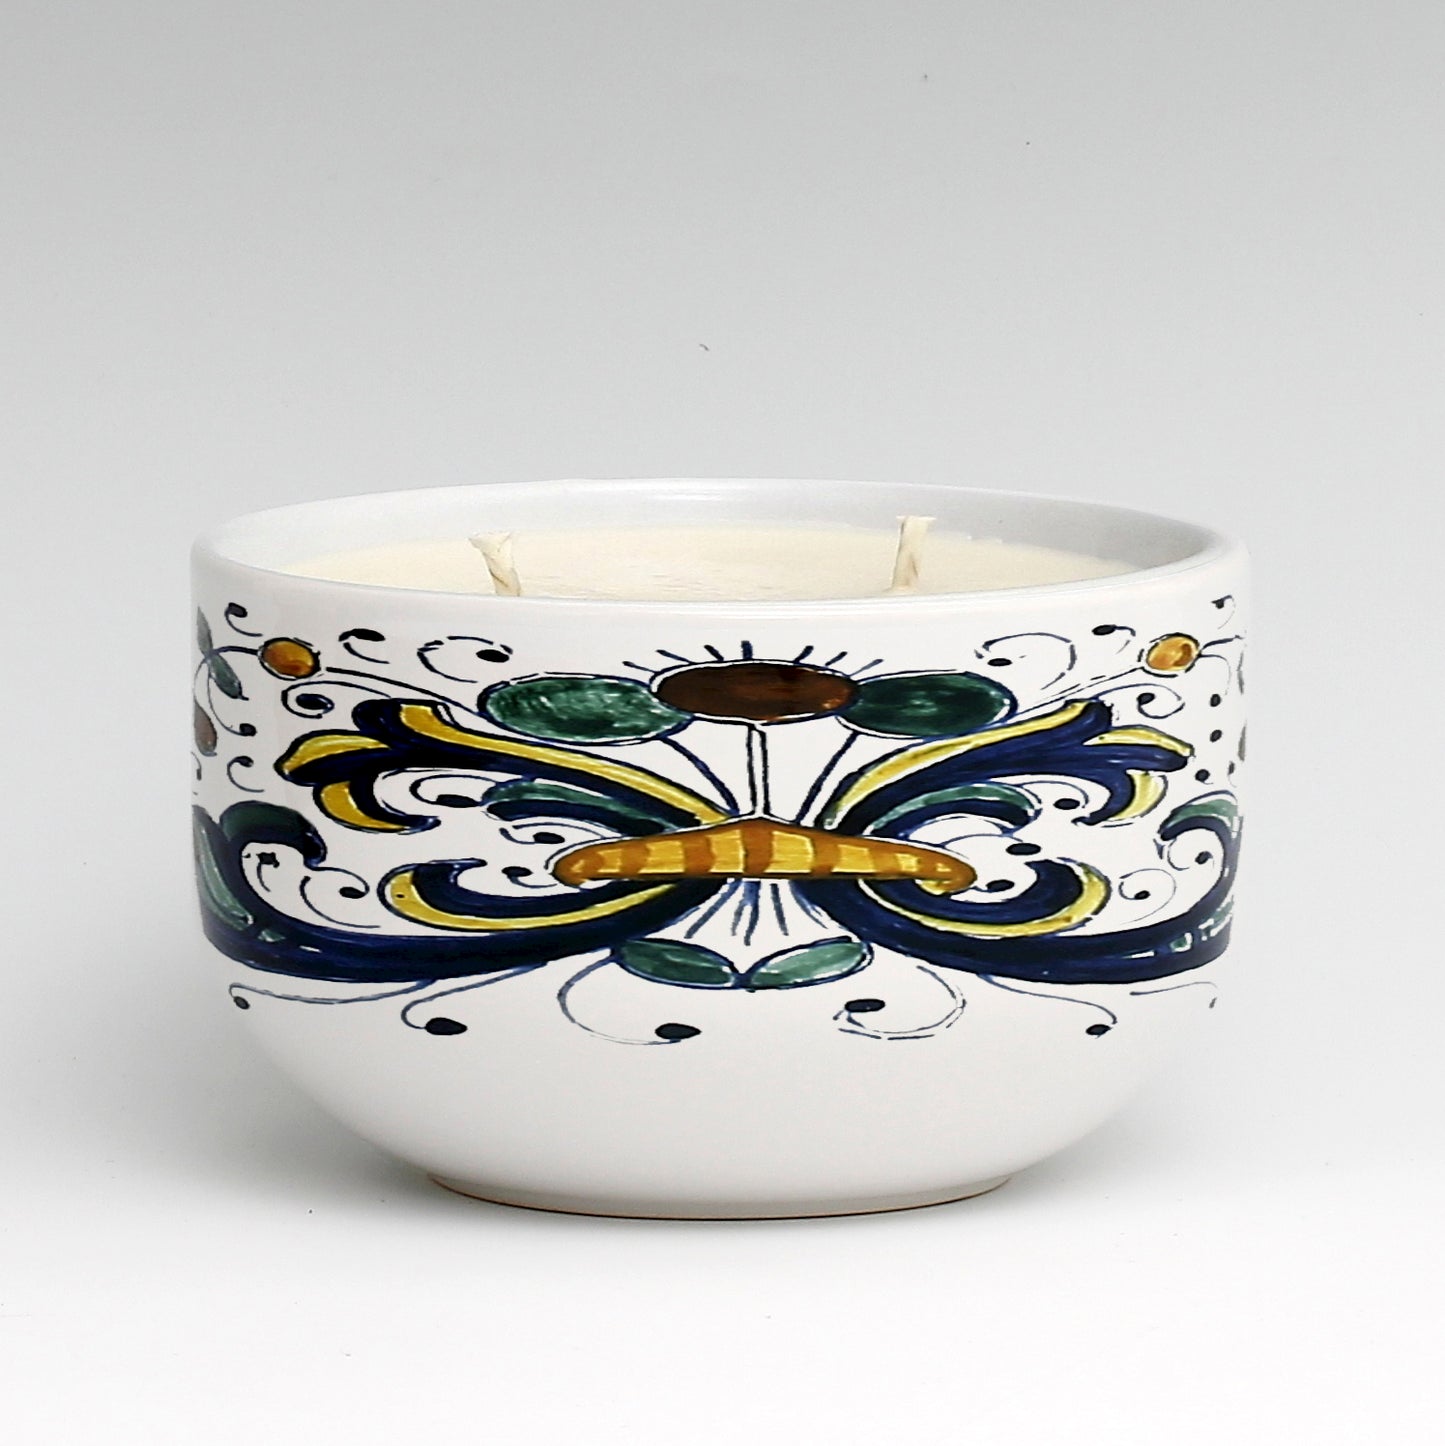 SUBLIMART: Two Wicks Soy Wax Candle in a Porcelain Bowl - Deruta Style (Design #DER01)